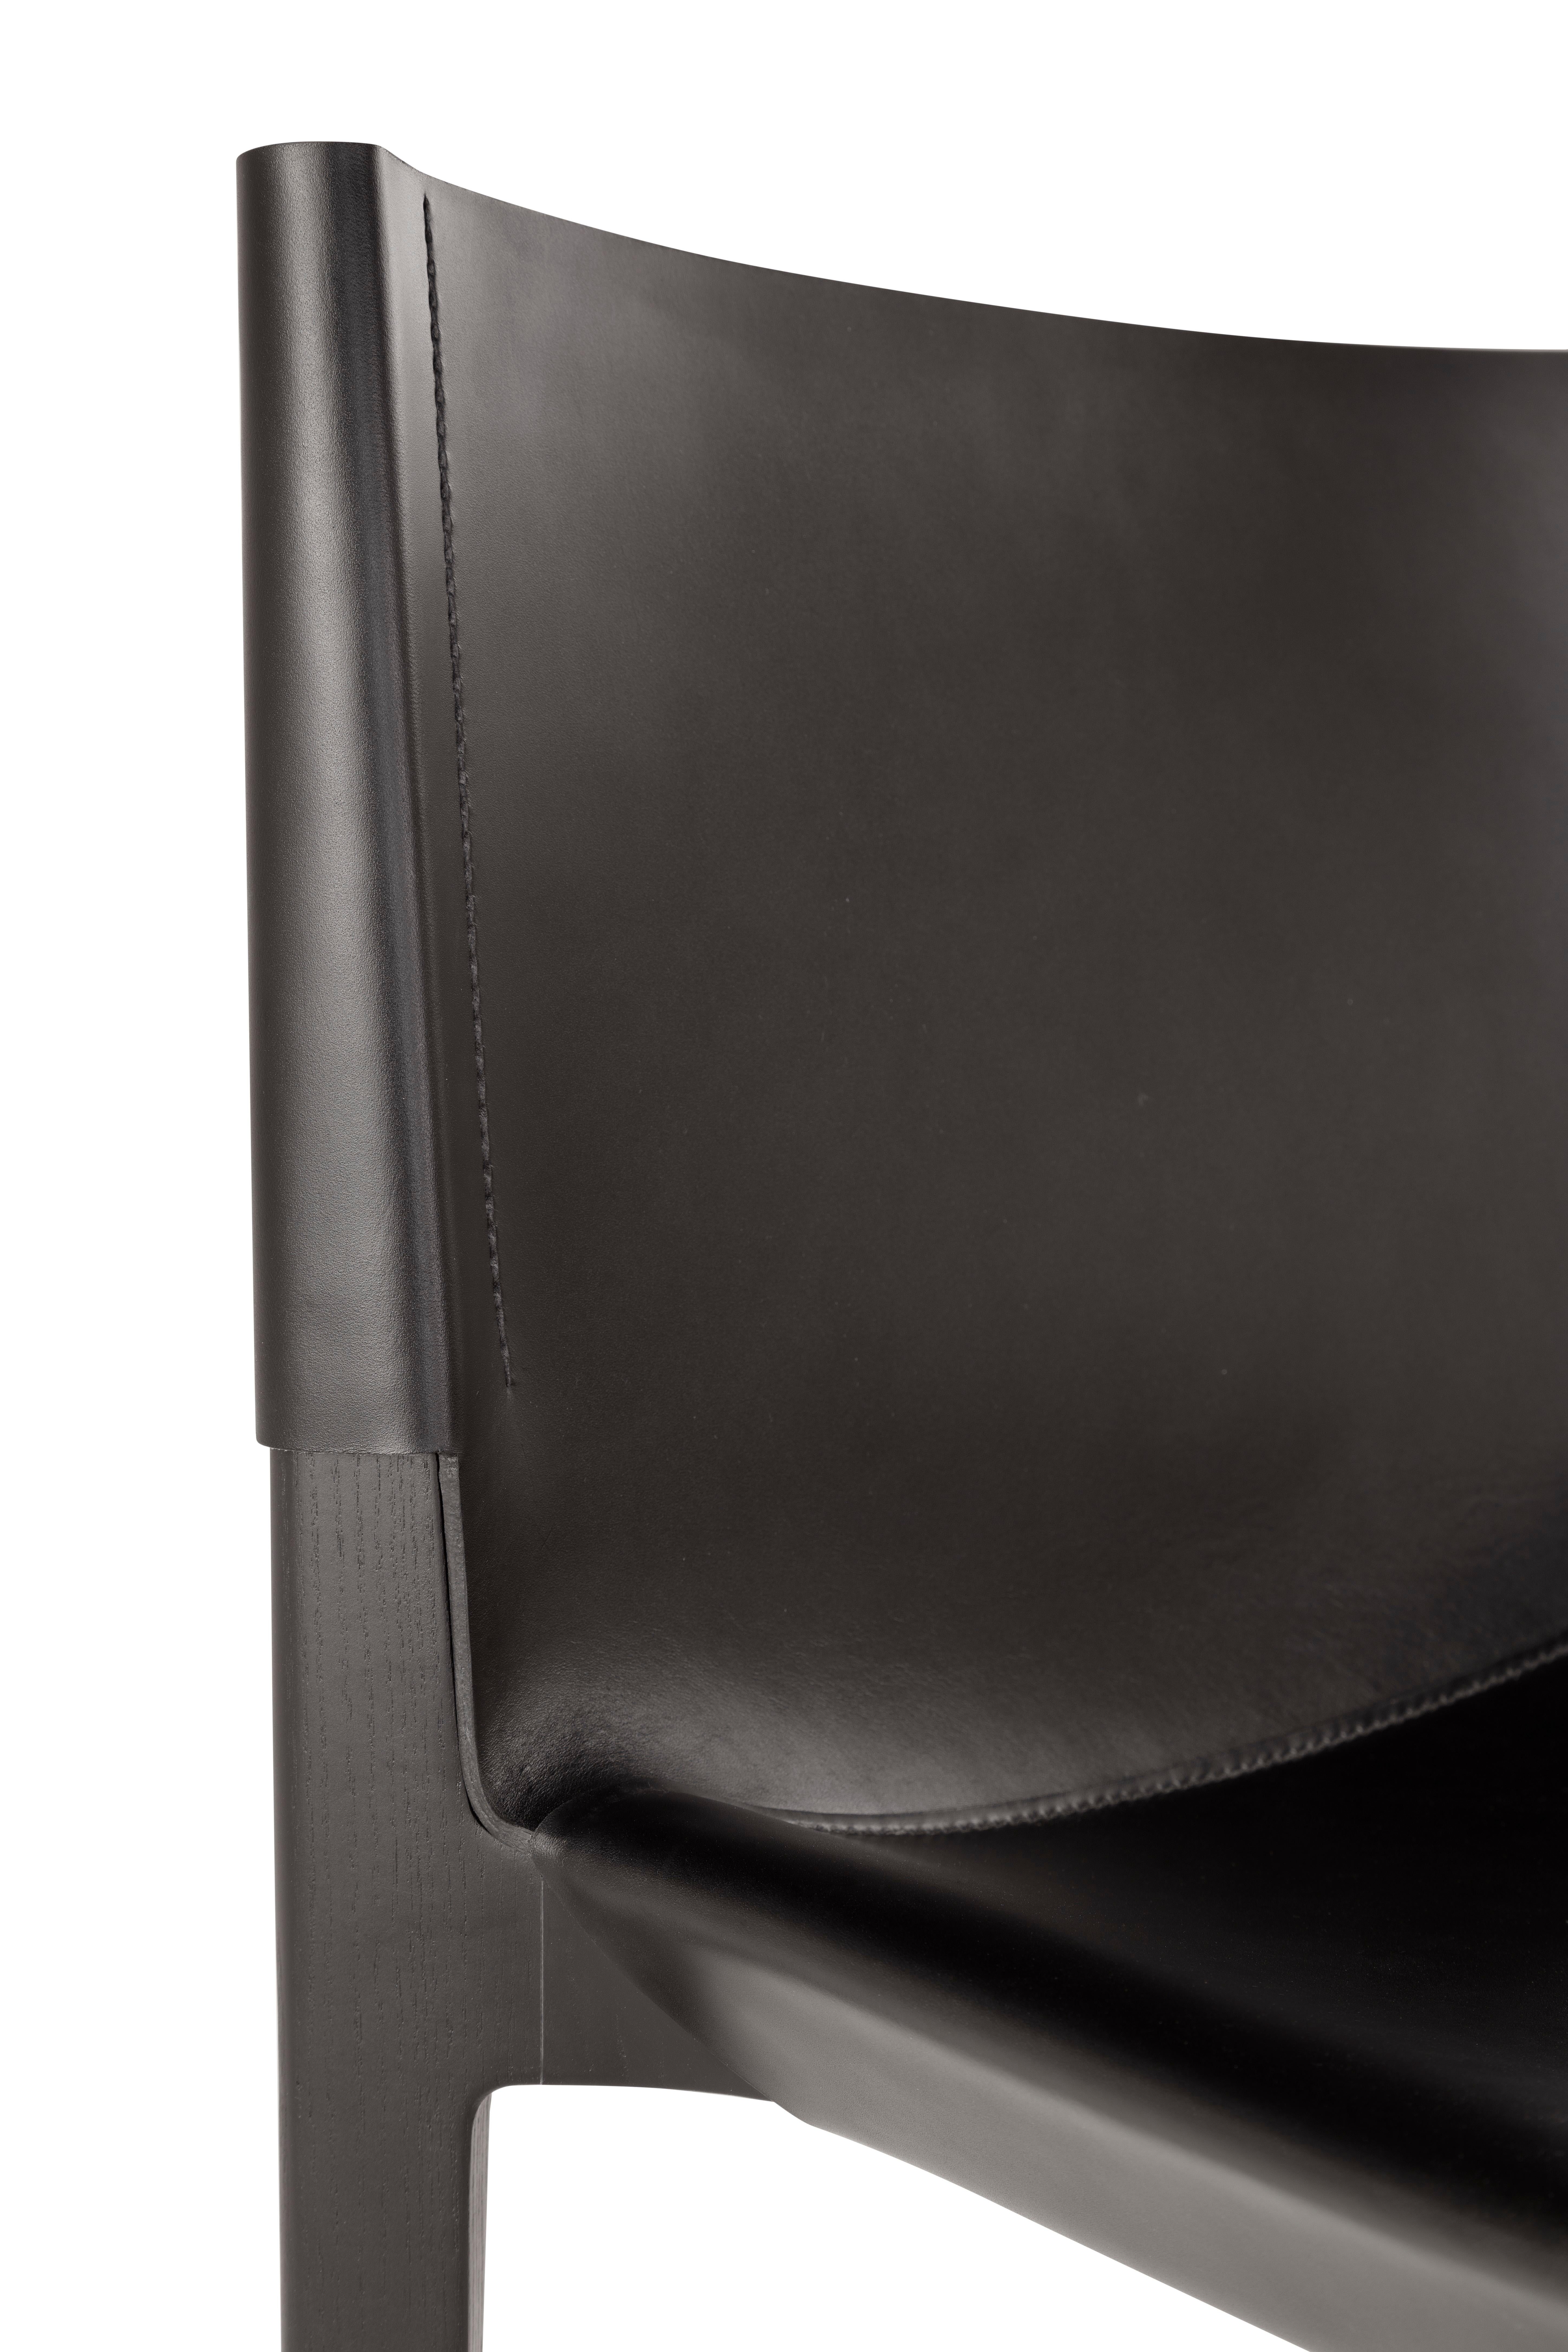 Contemporary Wooden Black Chair 'Stilt', Cuoio Leather For Sale 6